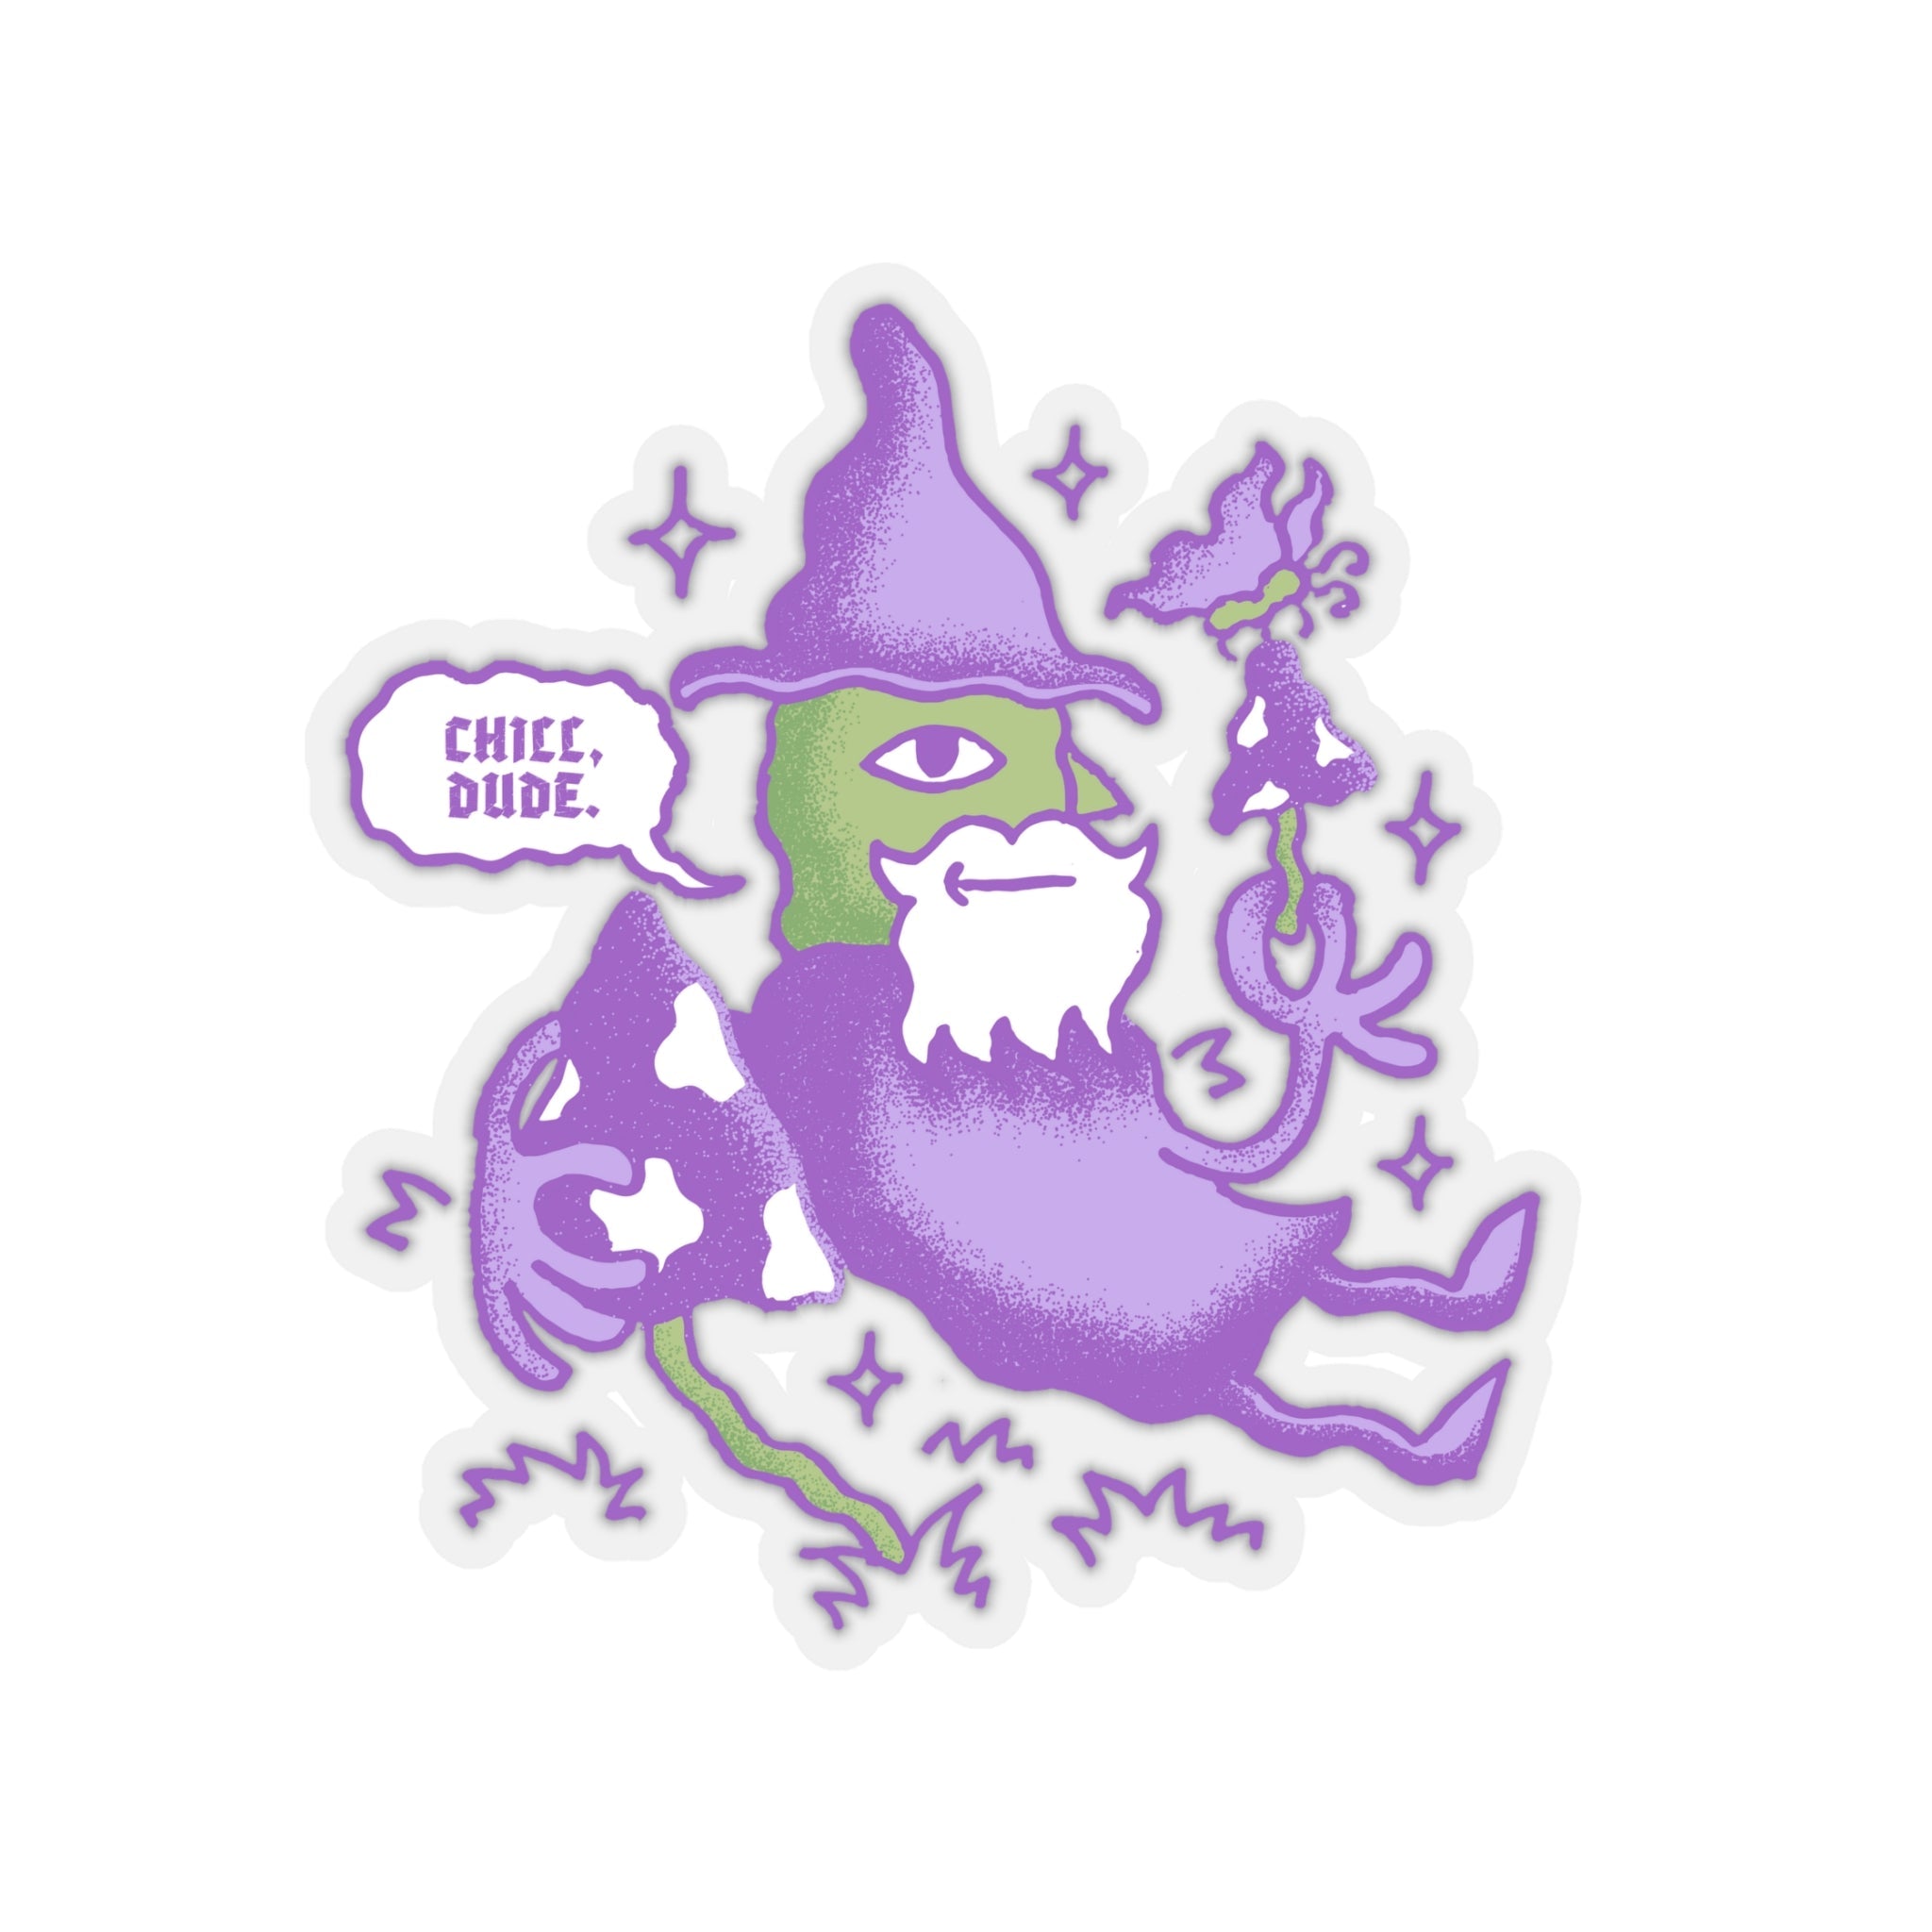 Chill, Dude | Kiss-Cut Sticker - Paper products - Ace of Gnomes - 23796247502863732702